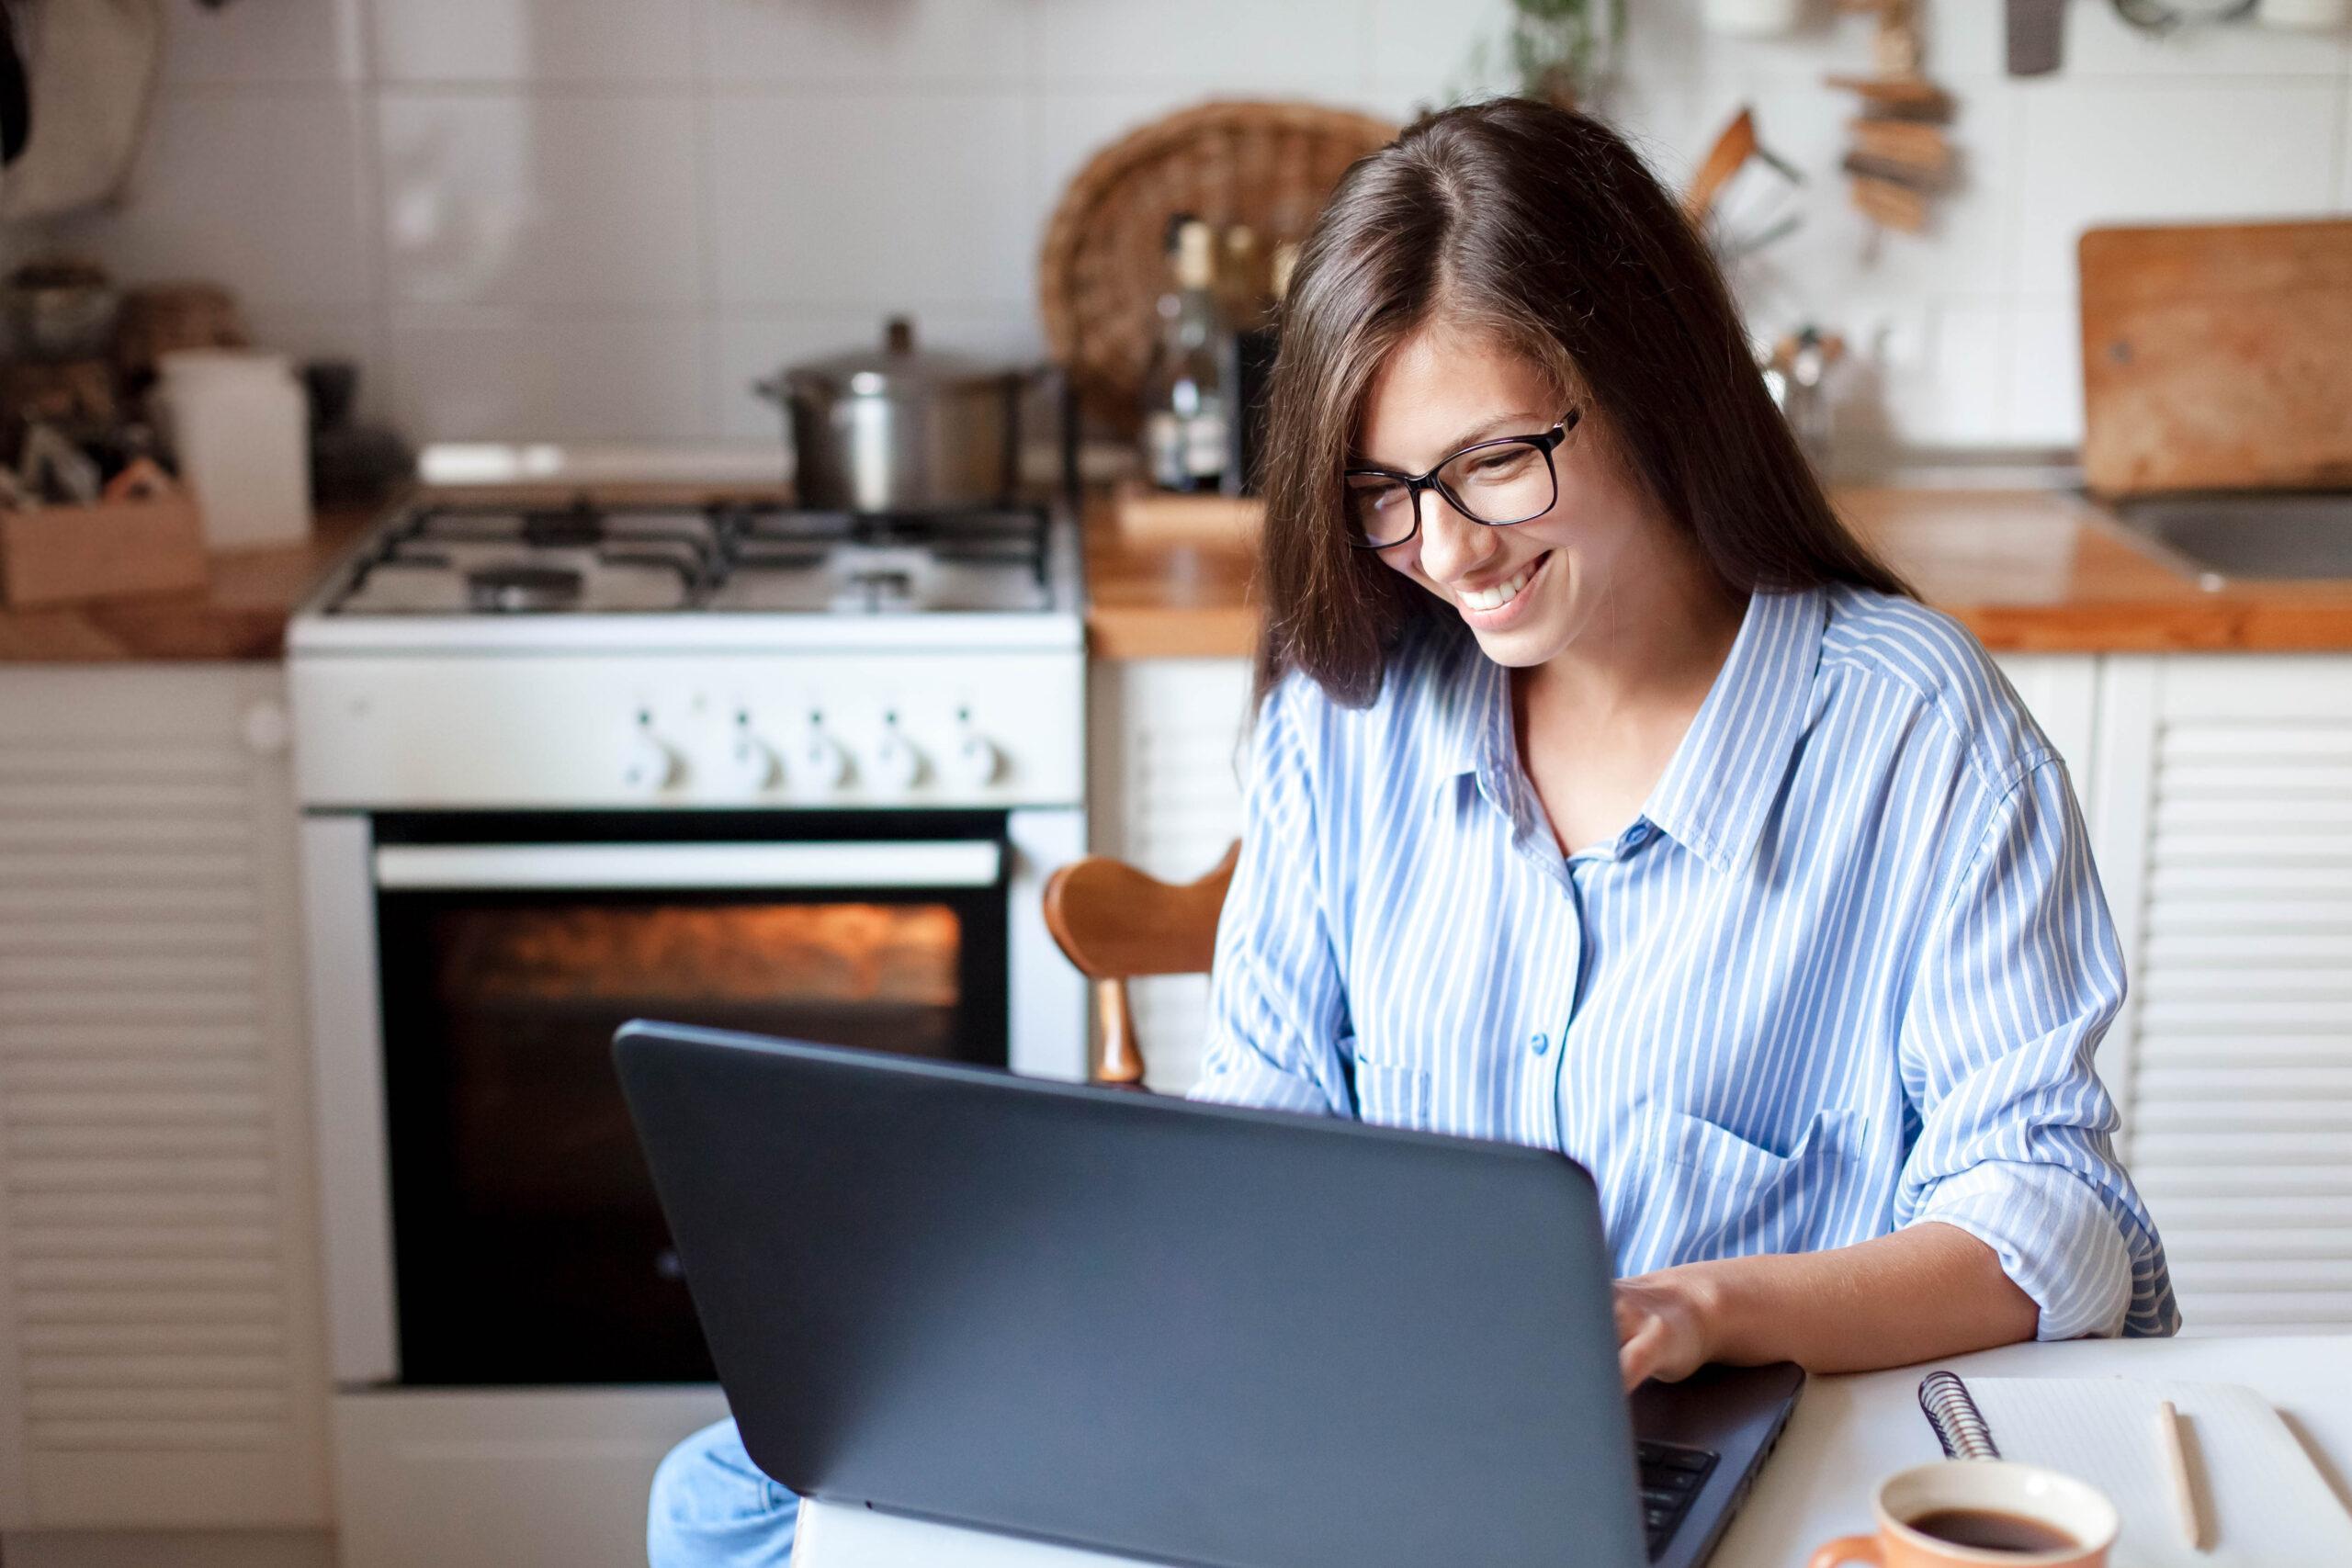 Young woman with glasses and long hair working from home office